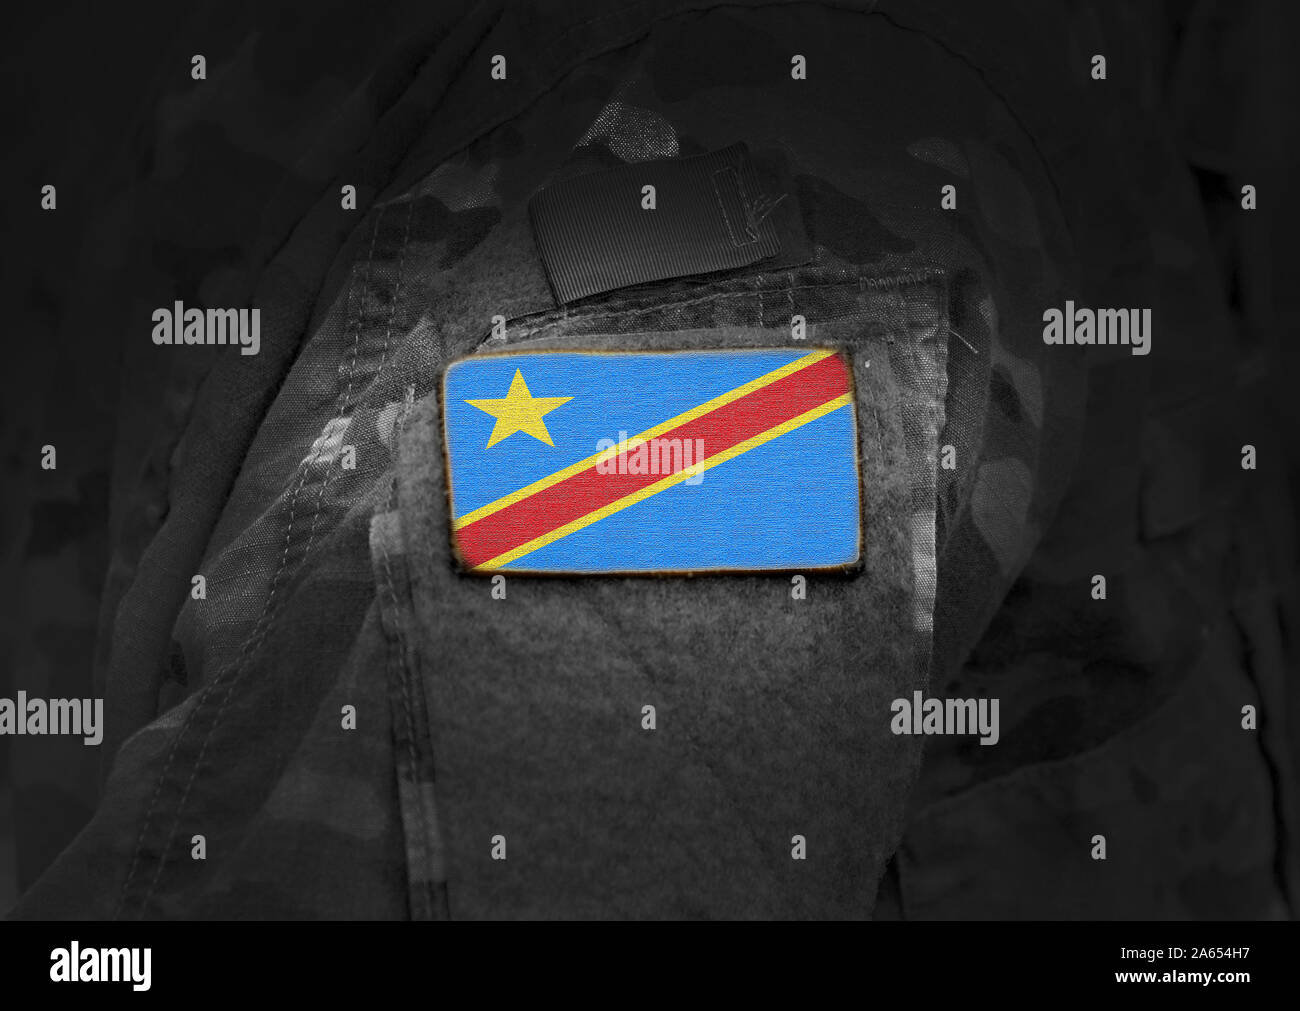 Flag of Democratic Republic of the Congo on military uniform. Army, troops, soldiers, Africa,(collage). Stock Photo